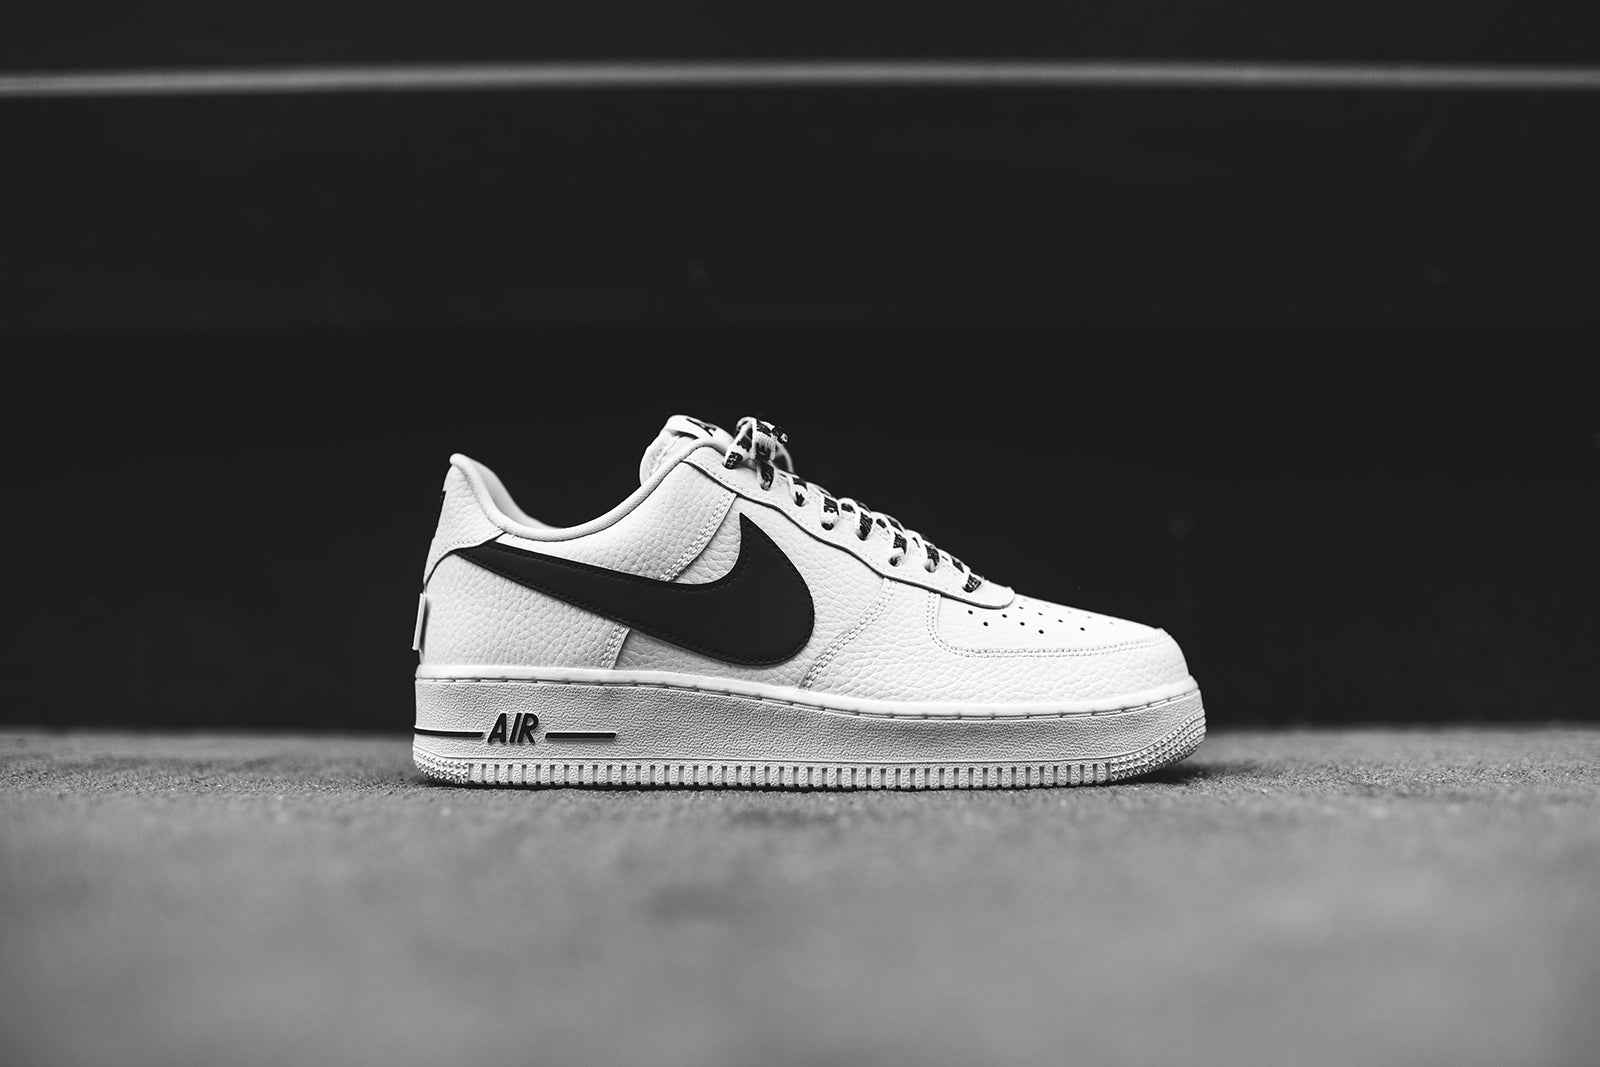 nike air force 1 low statement game white